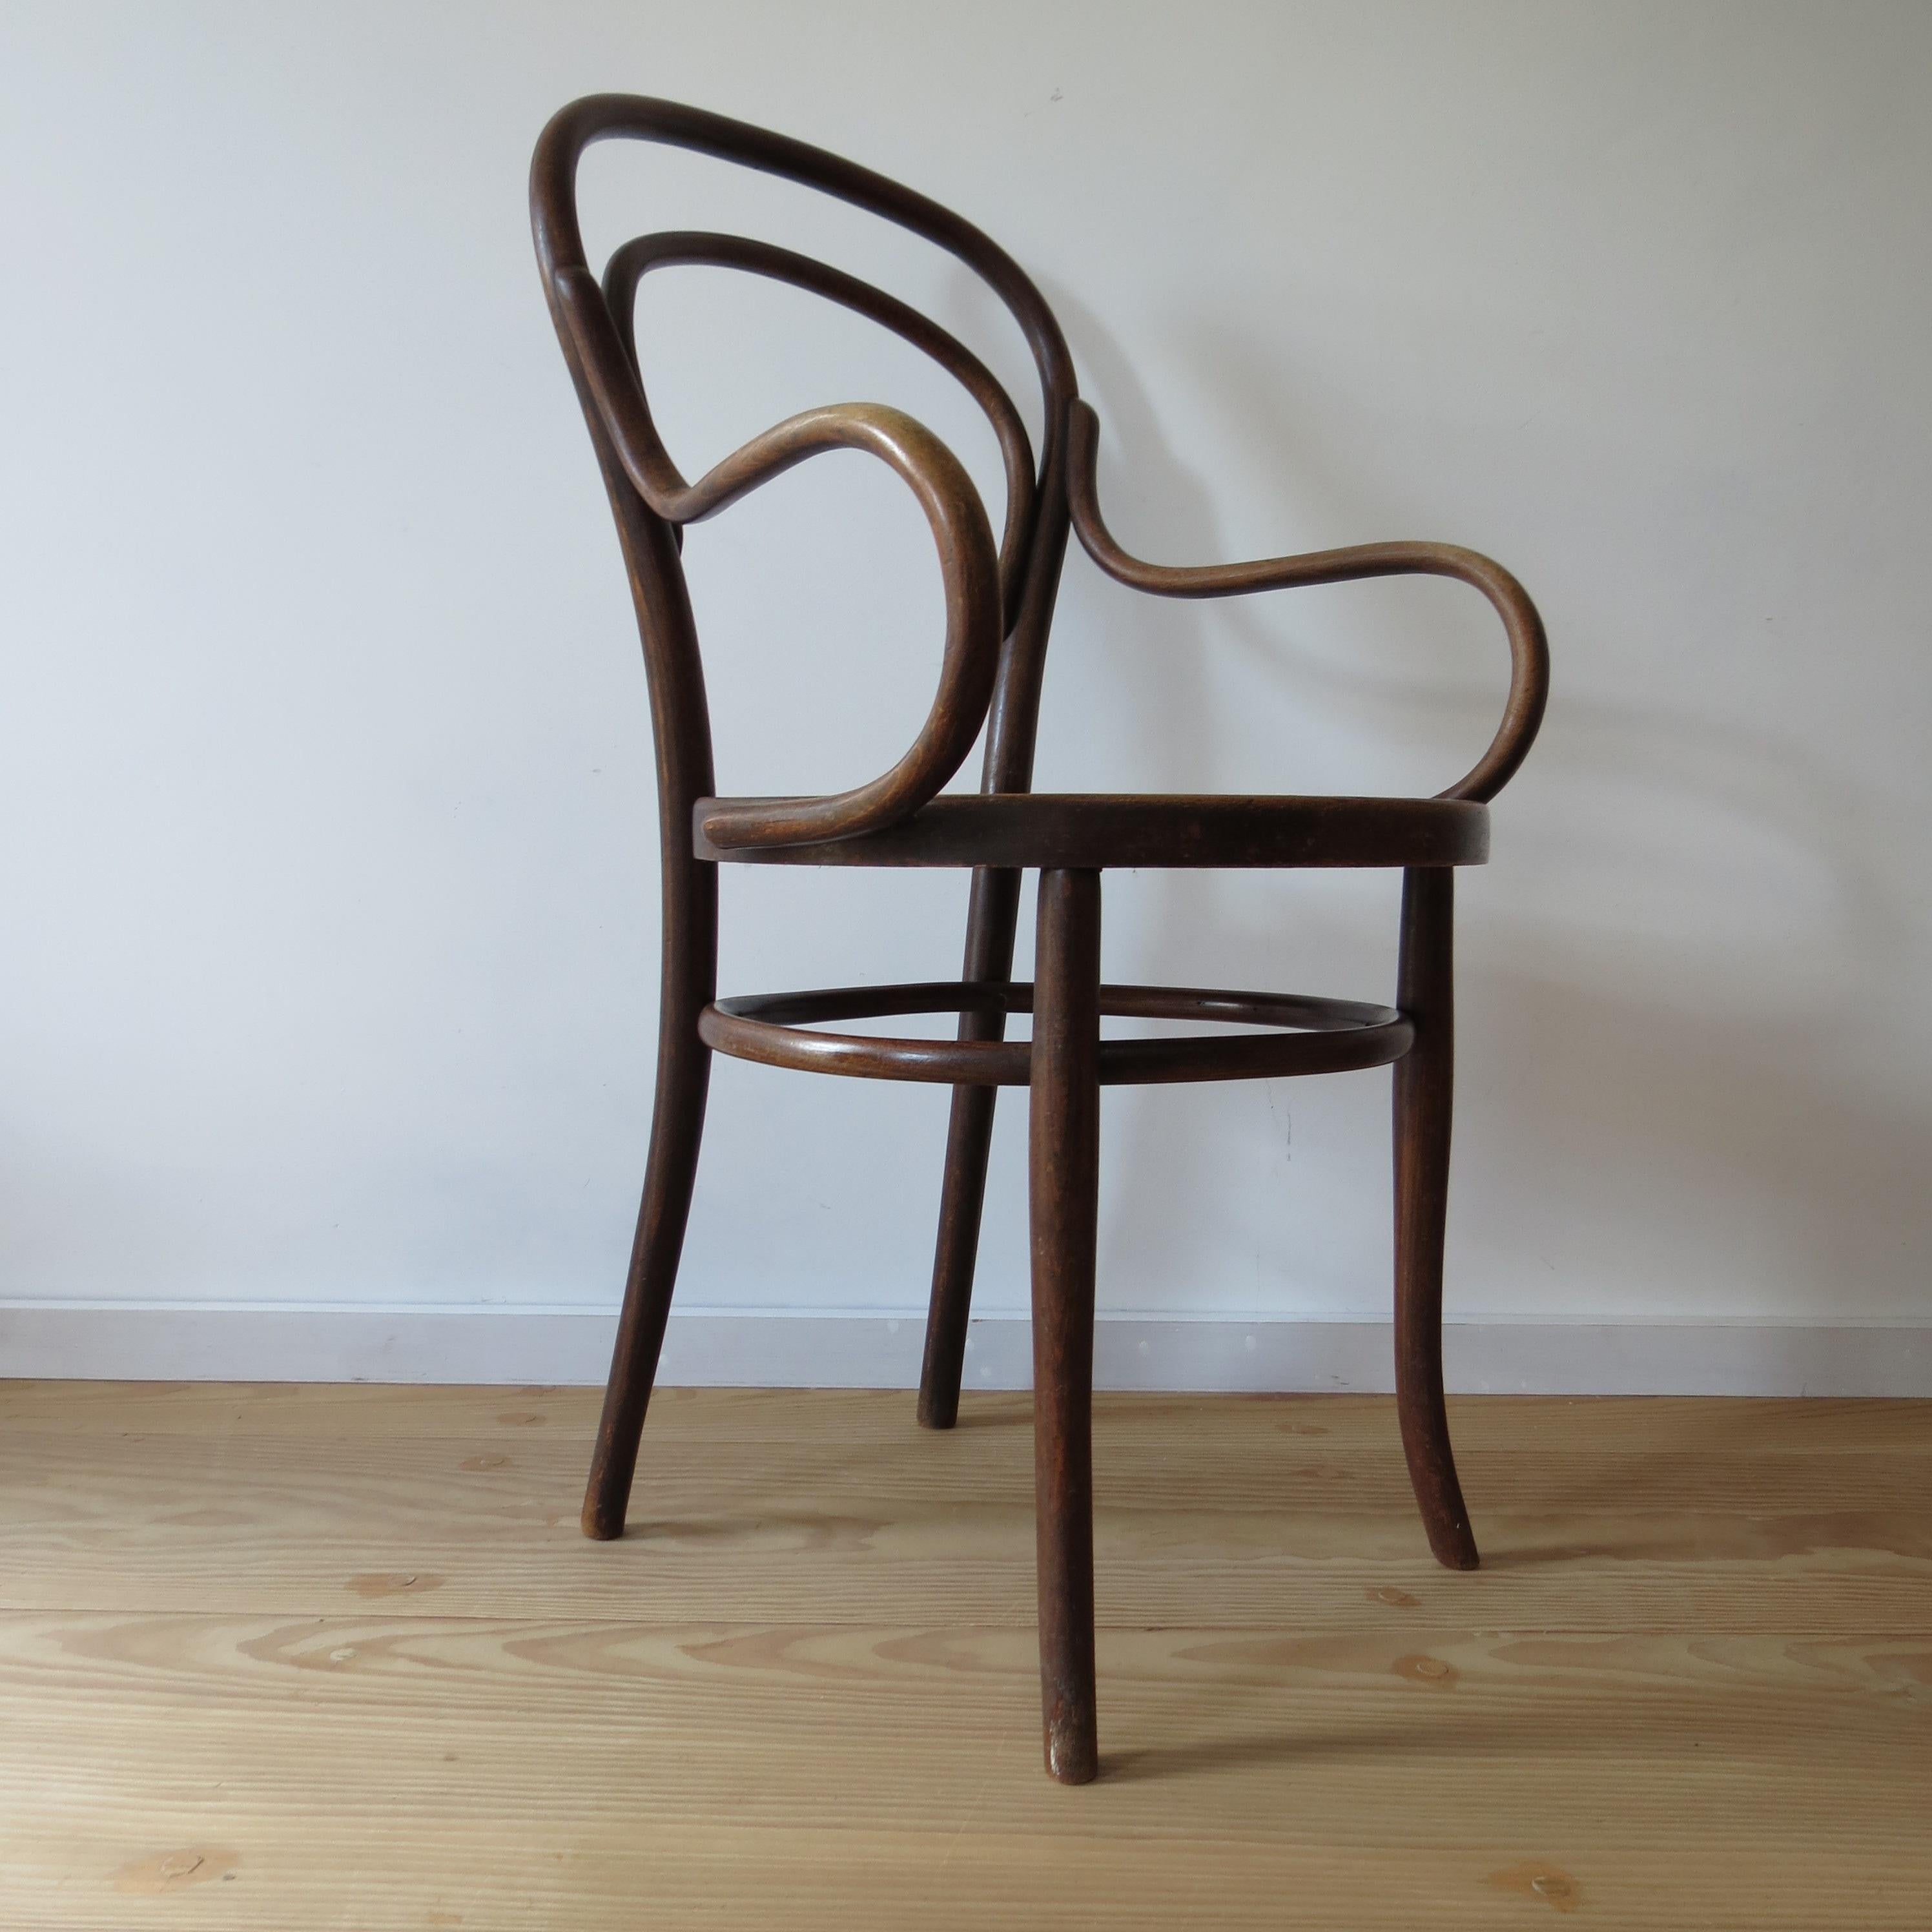 Wonderful bentwood chair by M Thonet. This chair was originally designed in 1859; this one dates from circa 1890, the Art Nouveau period.

In good original condition, wonderfully patinated all-over. Stamped to the rear of the seat of the chair B &